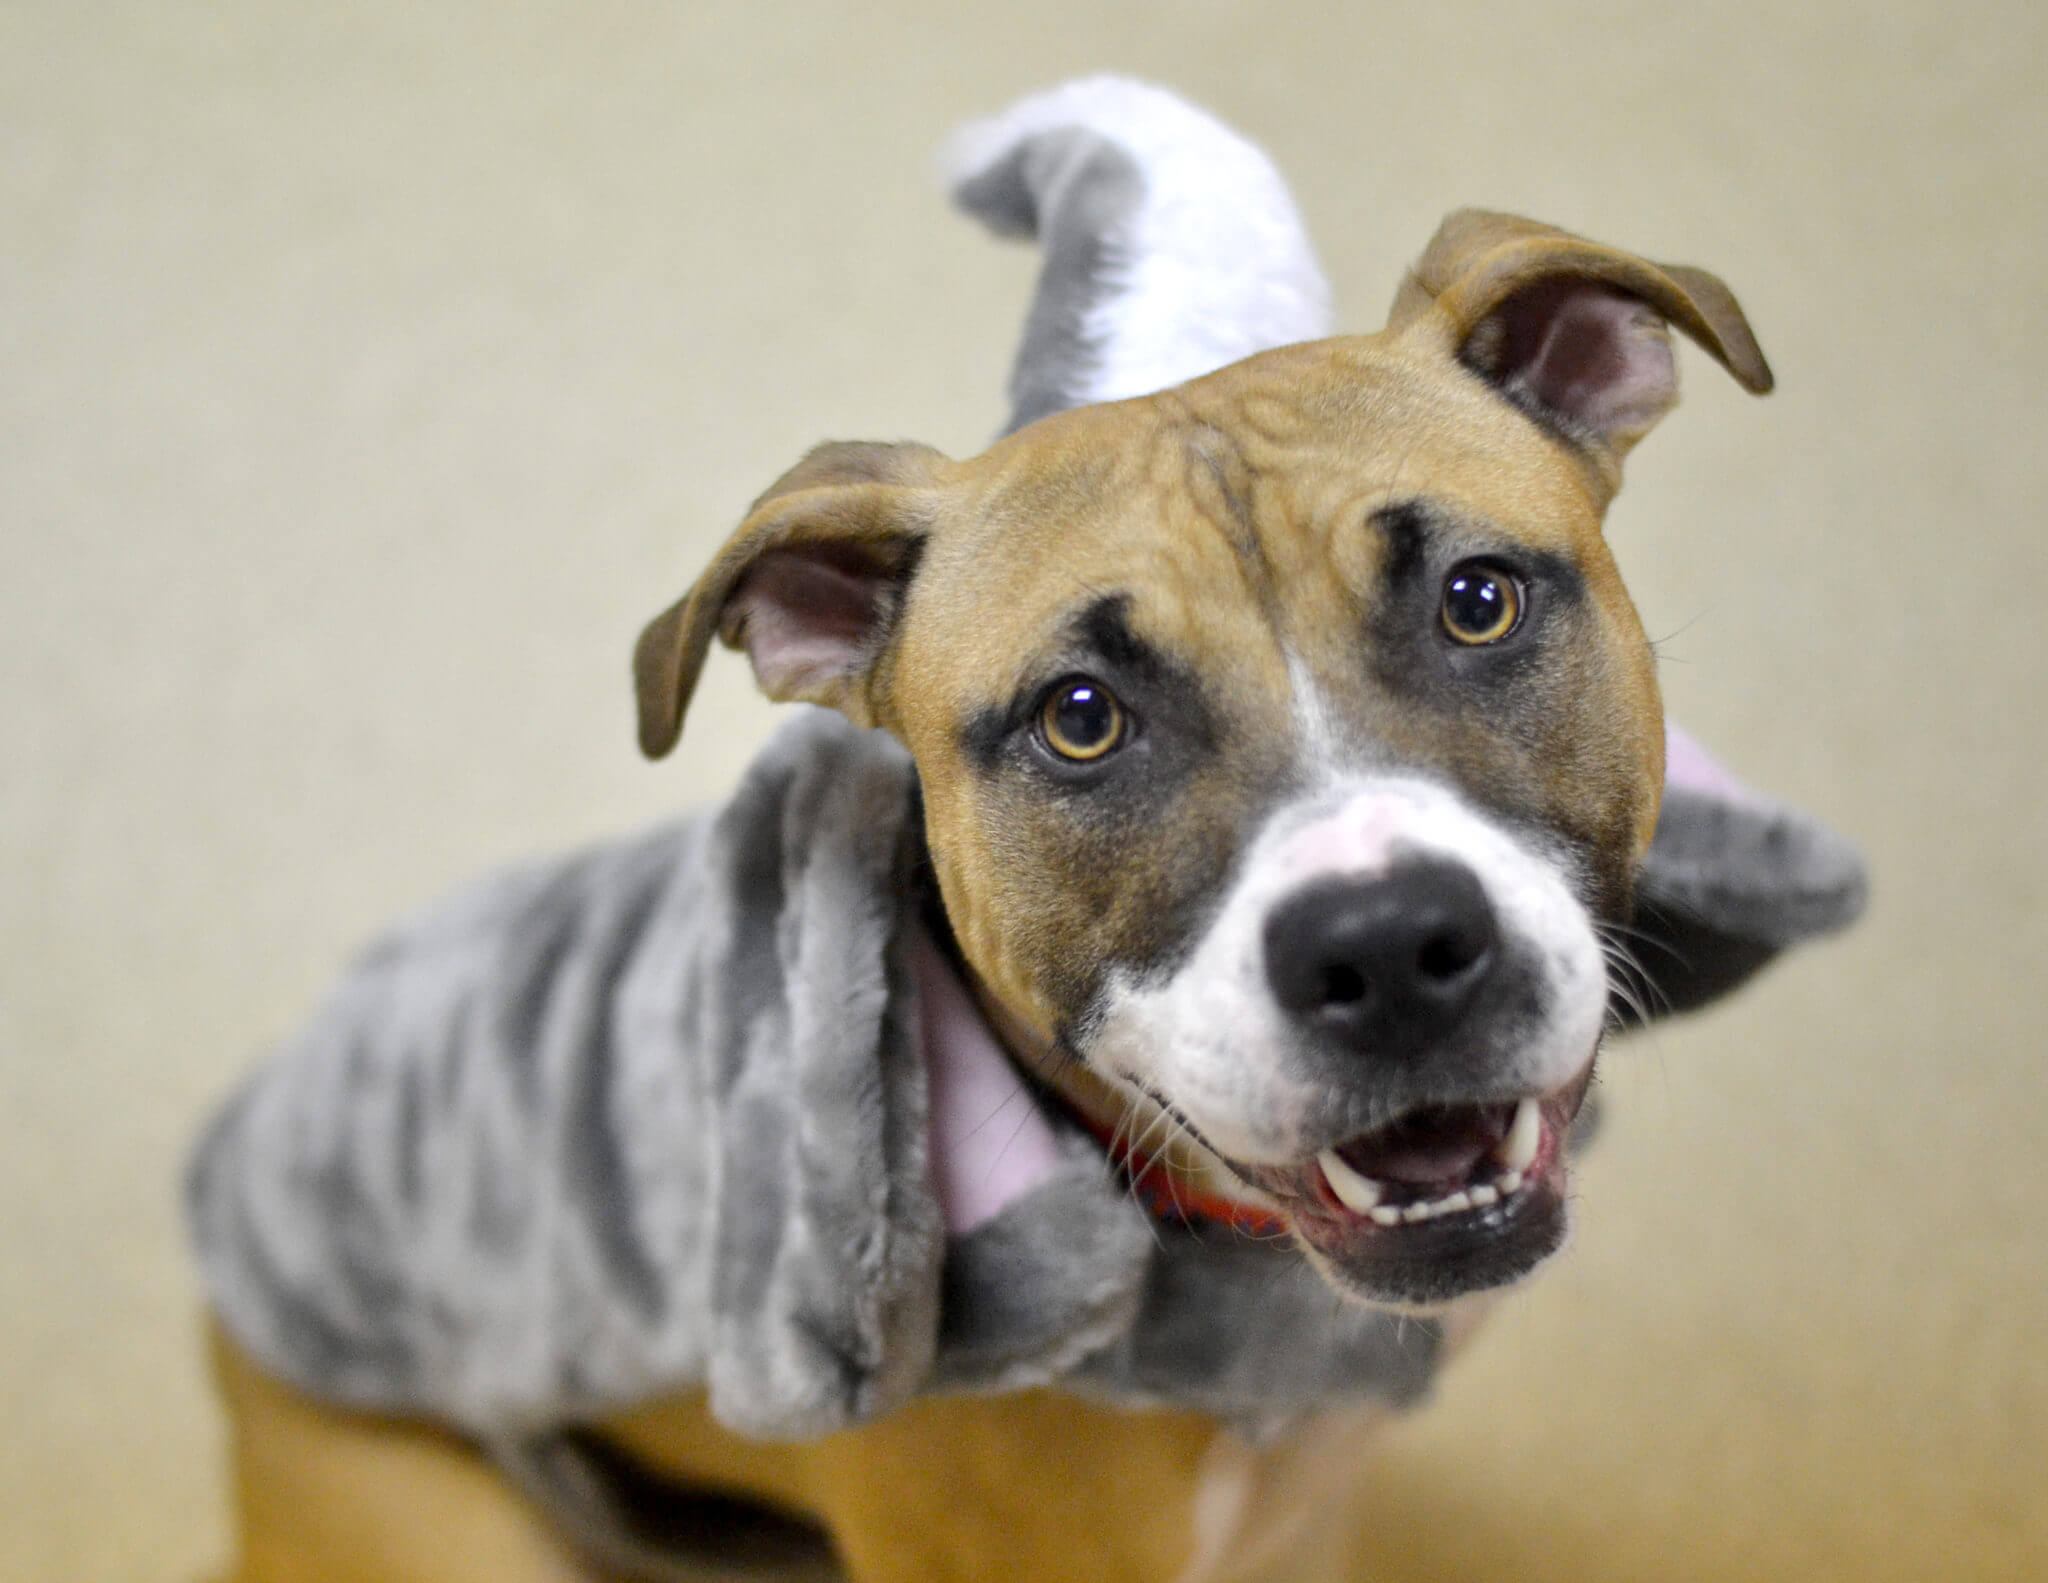 Sakura, dressed up as an elephant, is a two year old pit bull mix who is very energetic and sweet!